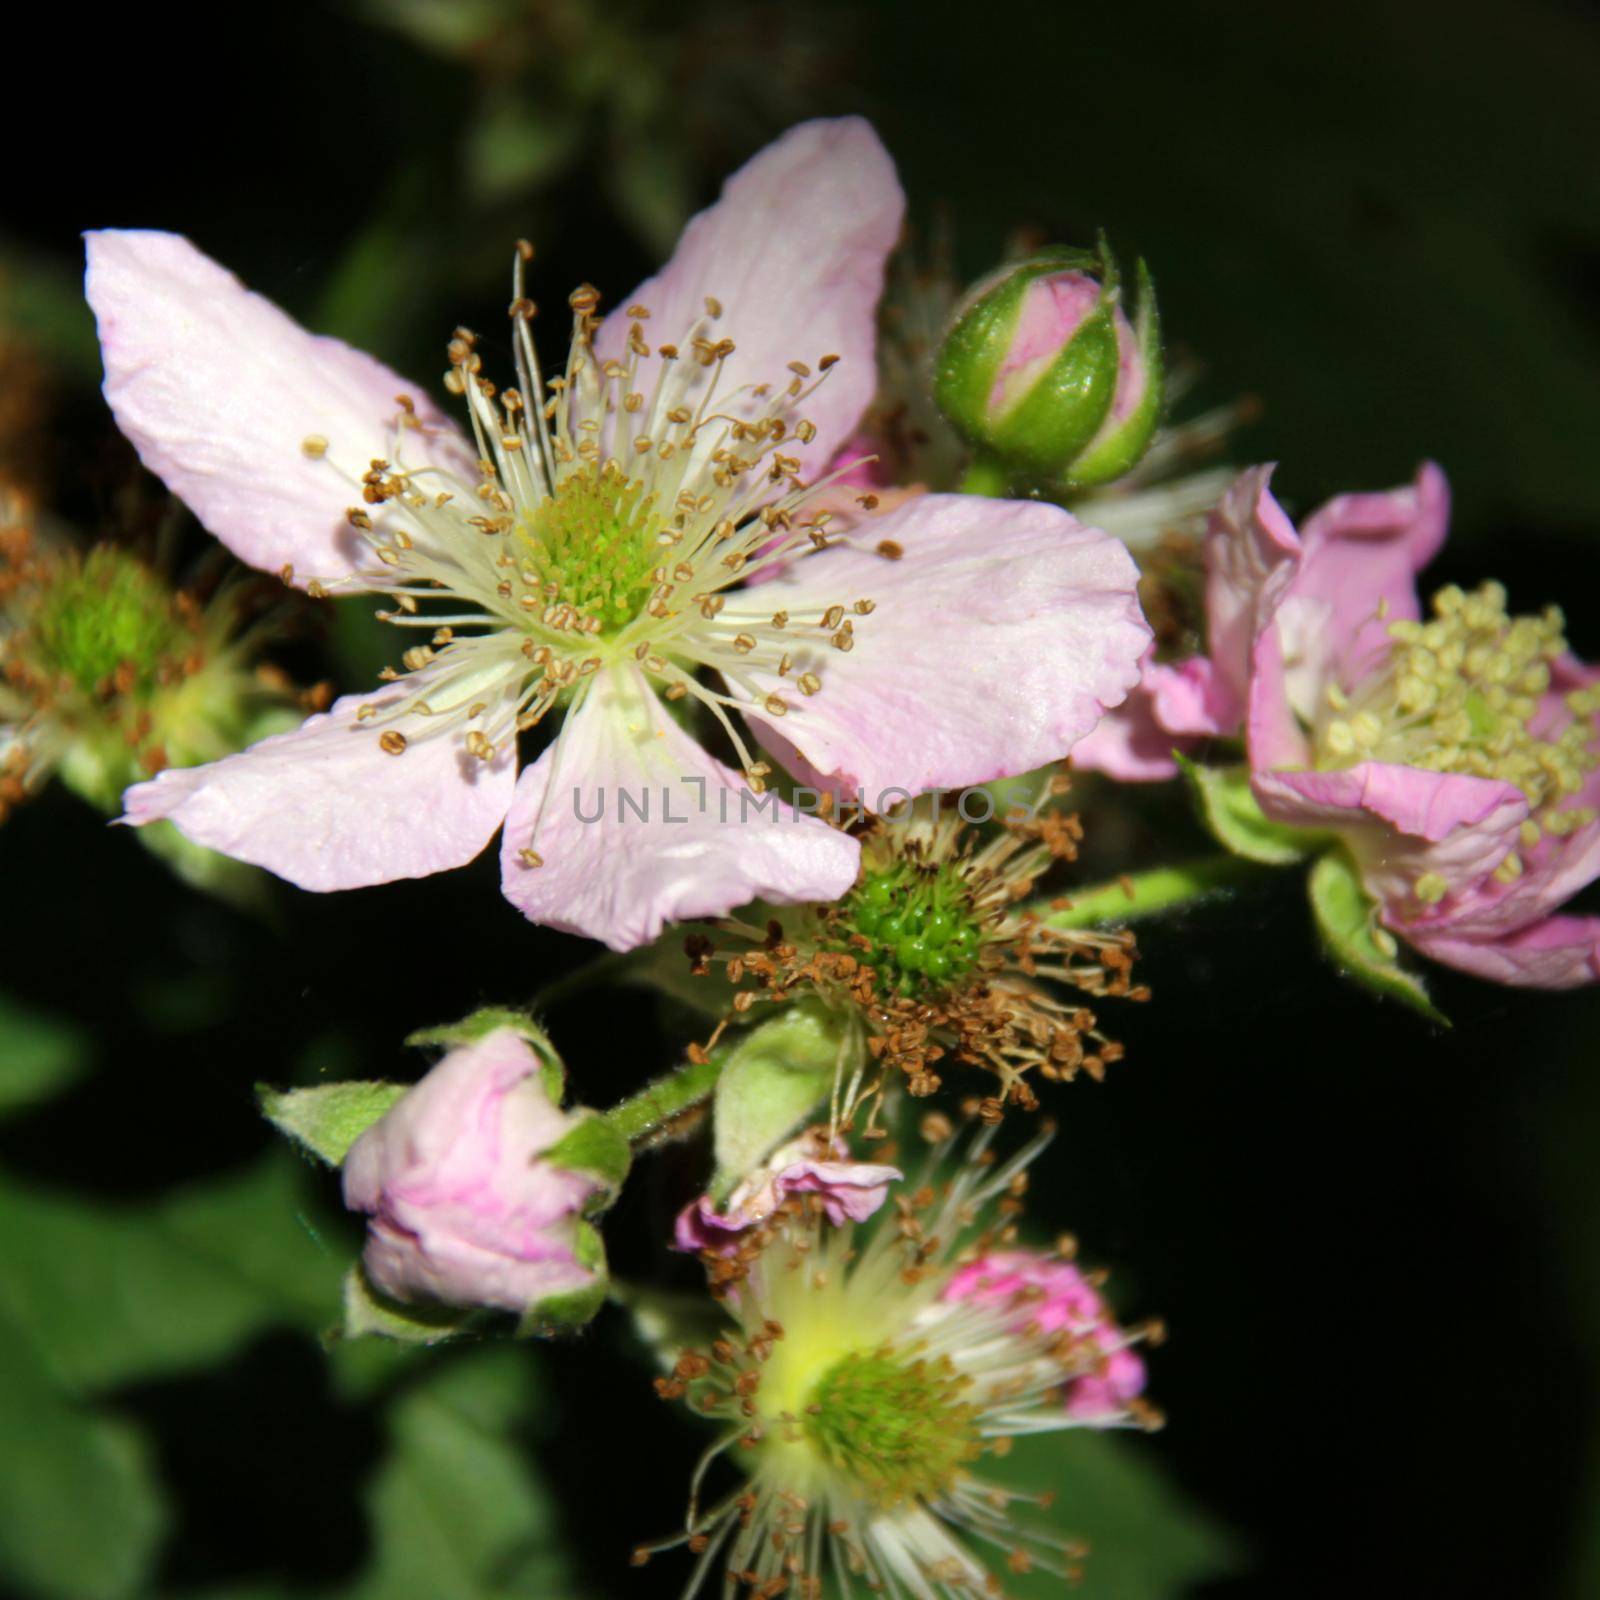 Blackberry blossom in different stages of blooming